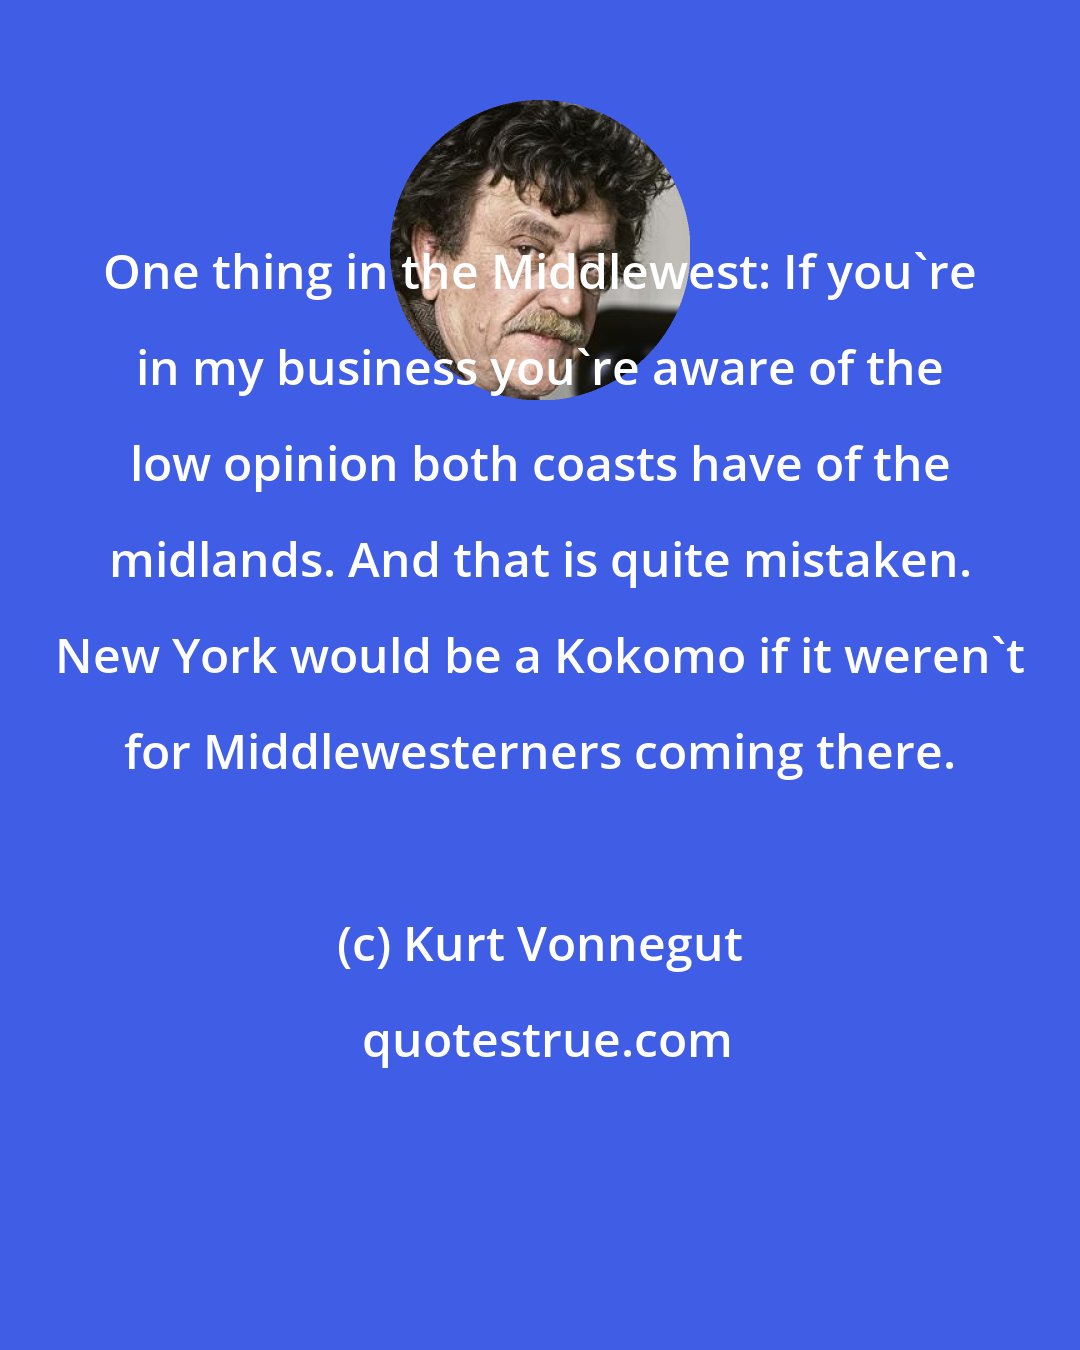 Kurt Vonnegut: One thing in the Middlewest: If you're in my business you're aware of the low opinion both coasts have of the midlands. And that is quite mistaken. New York would be a Kokomo if it weren't for Middlewesterners coming there.